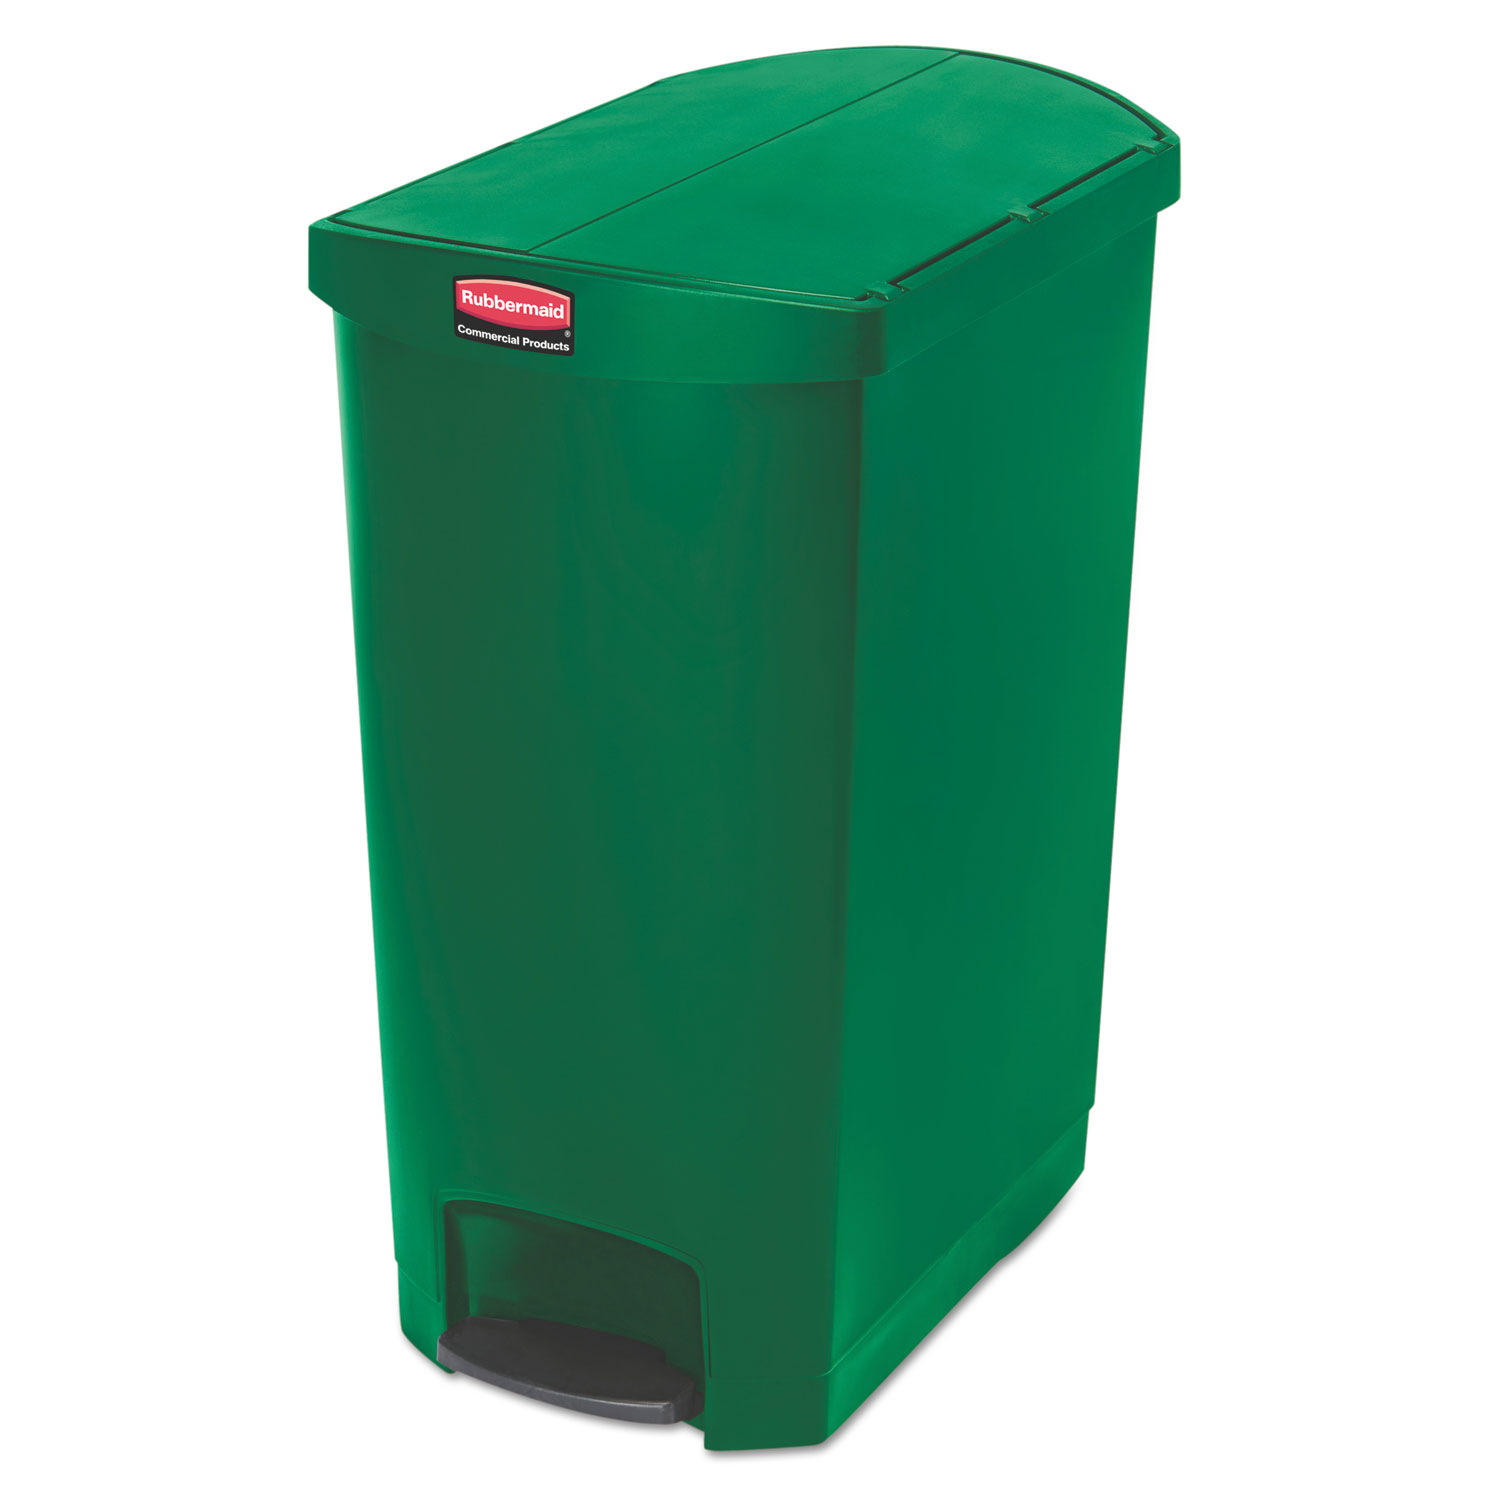  Rubbermaid Commercial 1883589 Slim Jim Resin Step-On Container, End Step Style, 24 gal, Green (RCP1883589) 